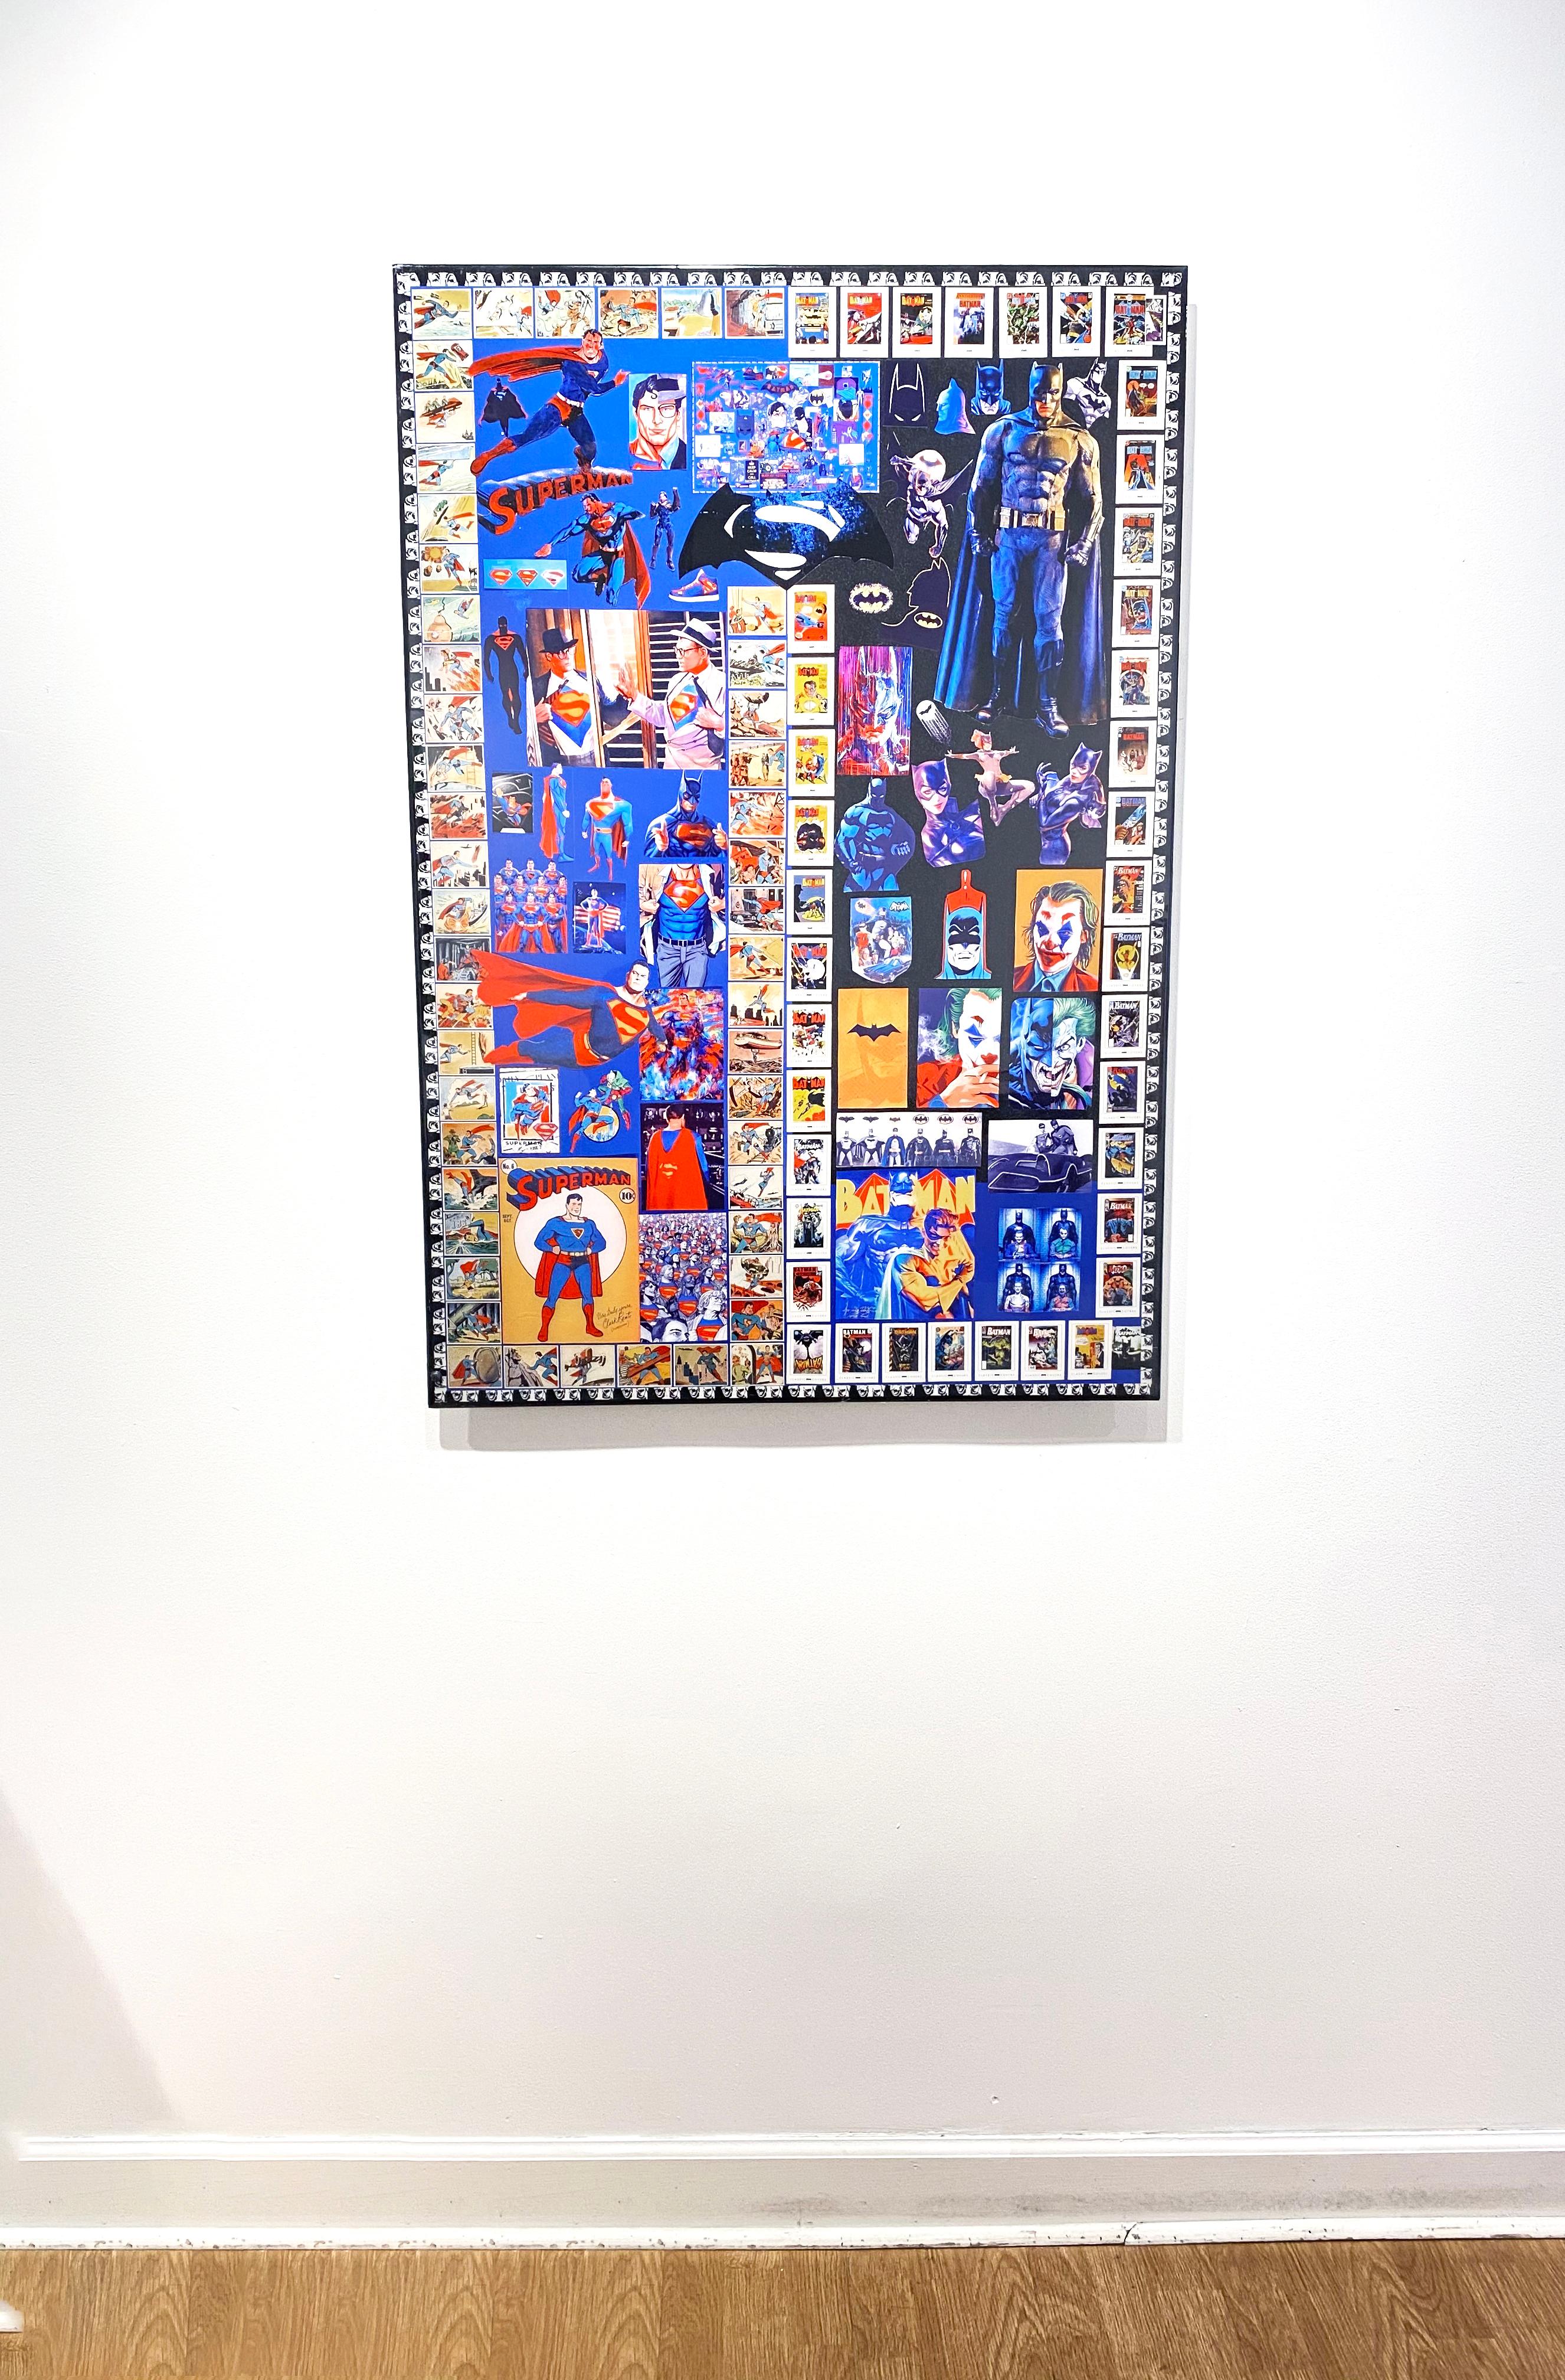 'Superman and Batman' by DJ Leon, 2020. The piece measures 44.5 x 30.5 inches. This digital C print on aluminum with resin incorporates, appropriates, and combines images of Batman, Superman, along with comic book imagery. DJ Leon's signature frame